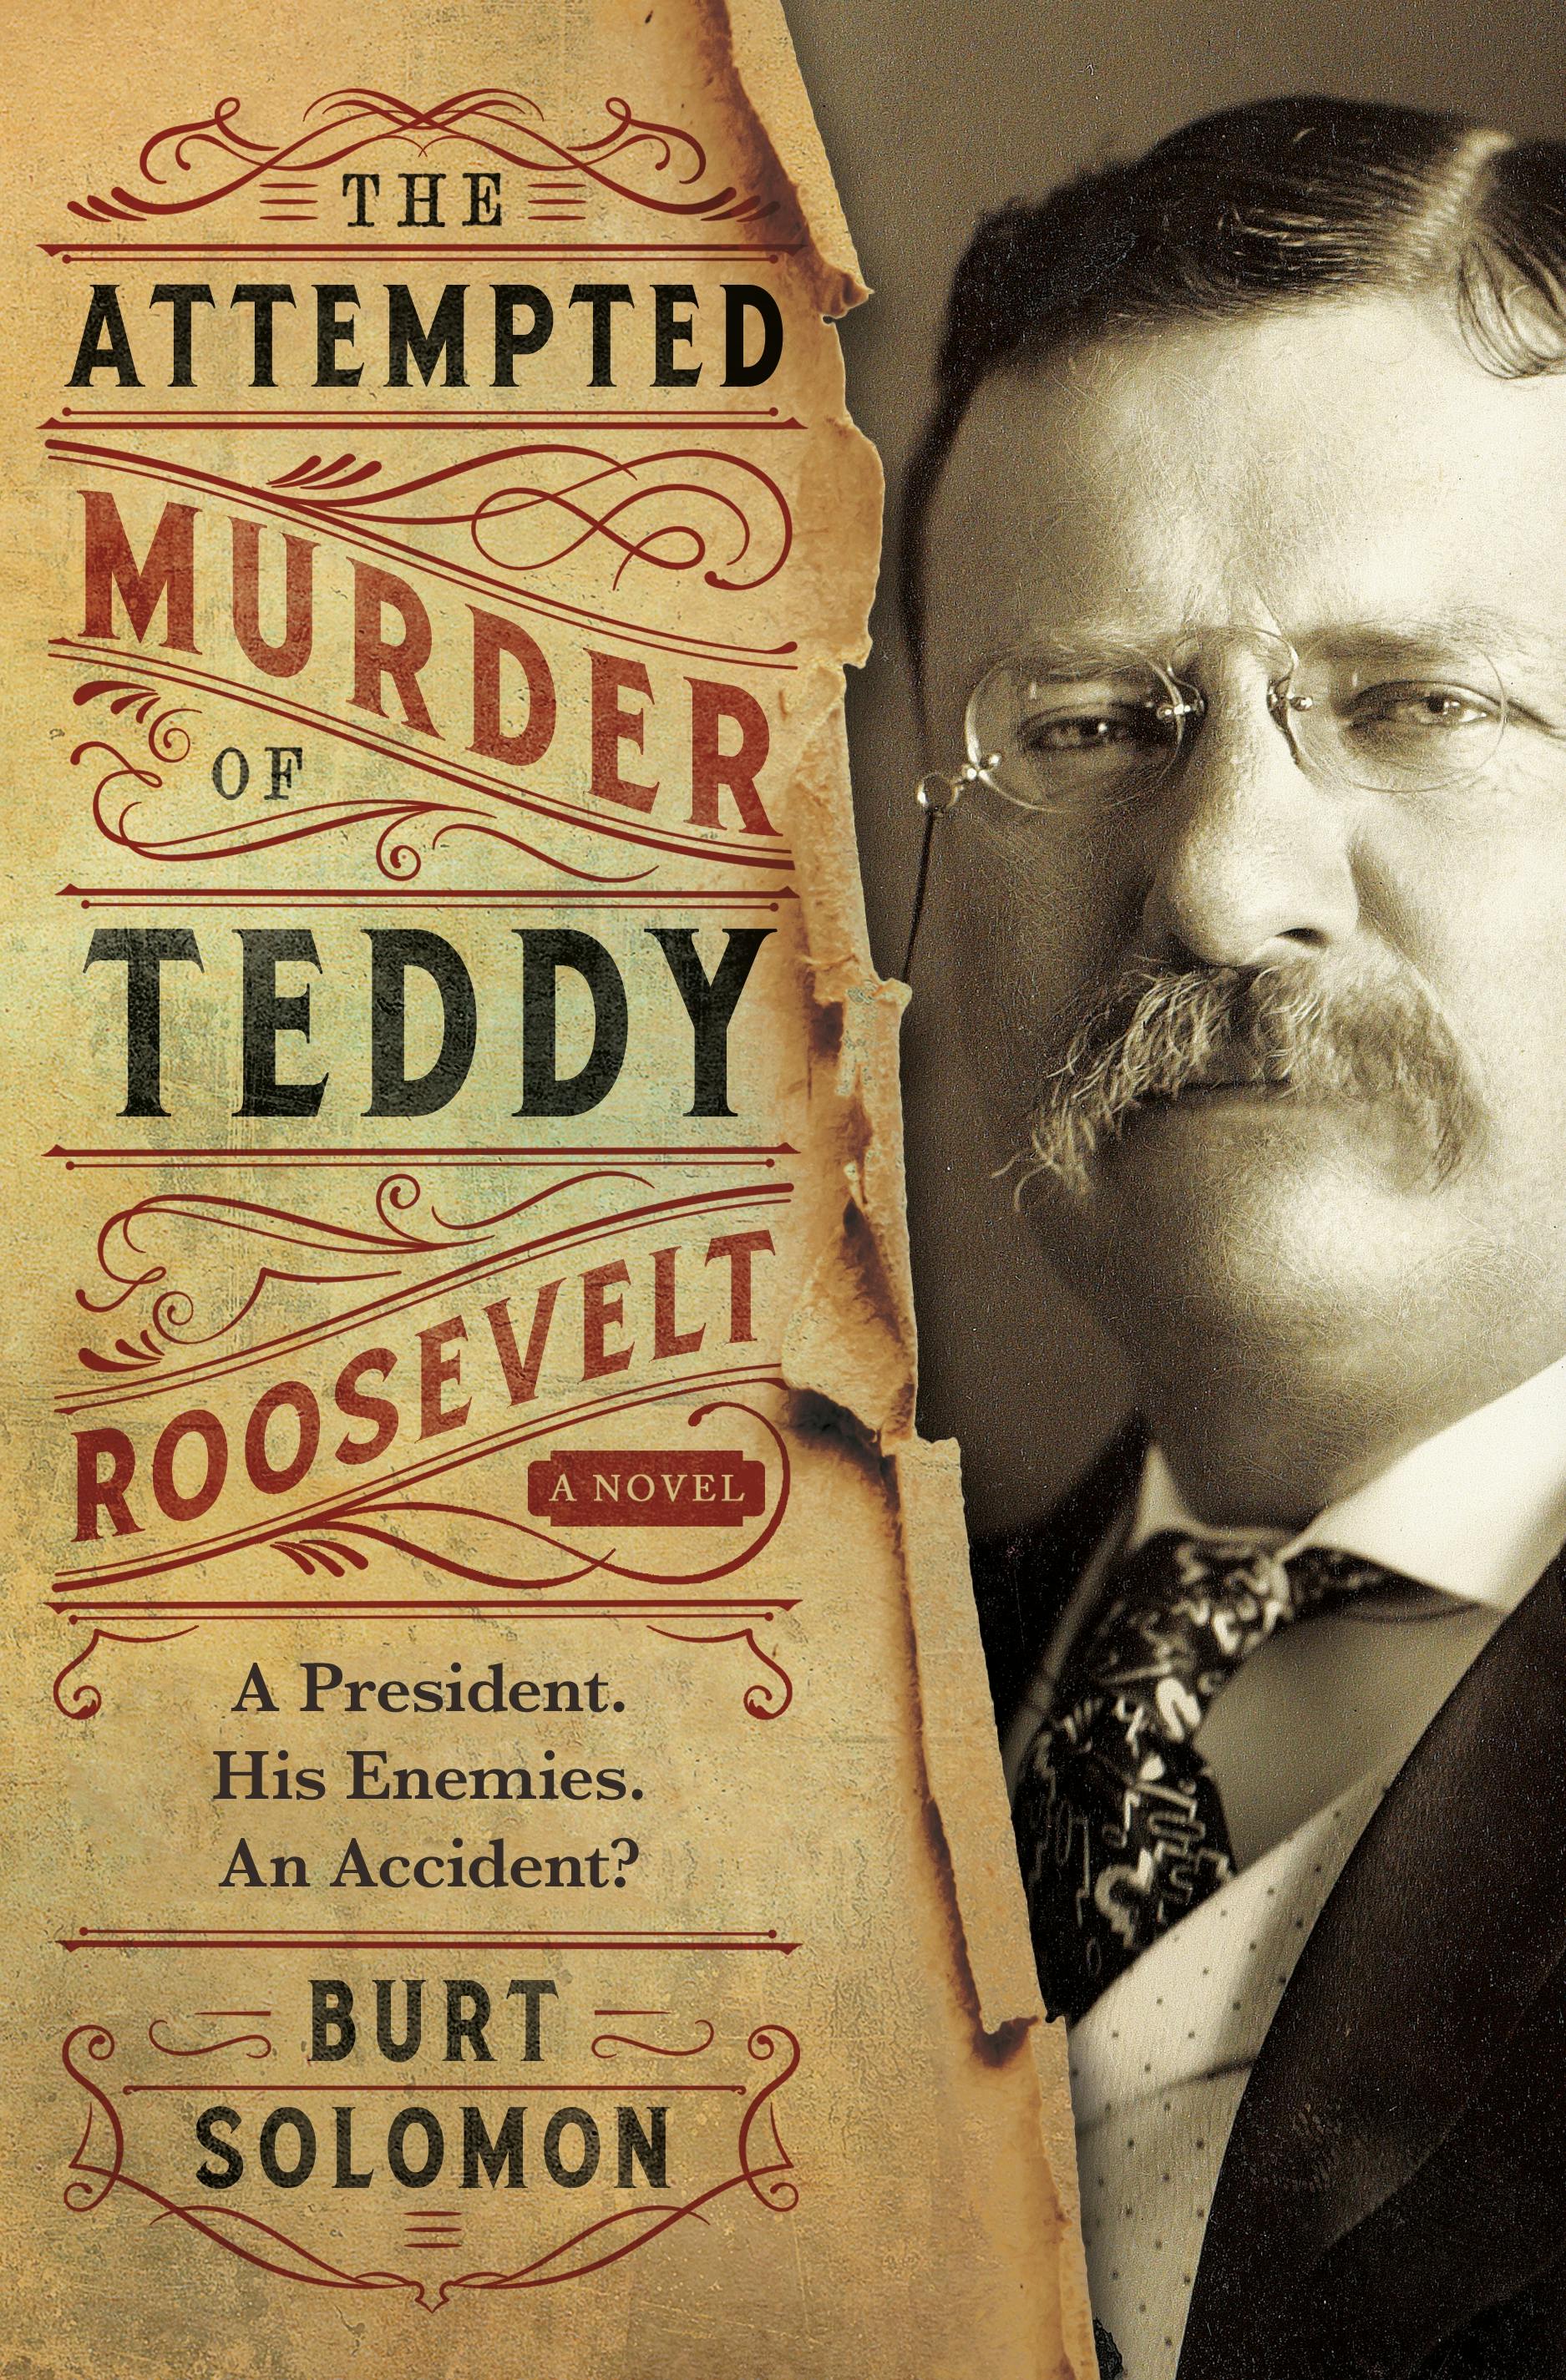 Image of The Attempted Murder of Teddy Roosevelt